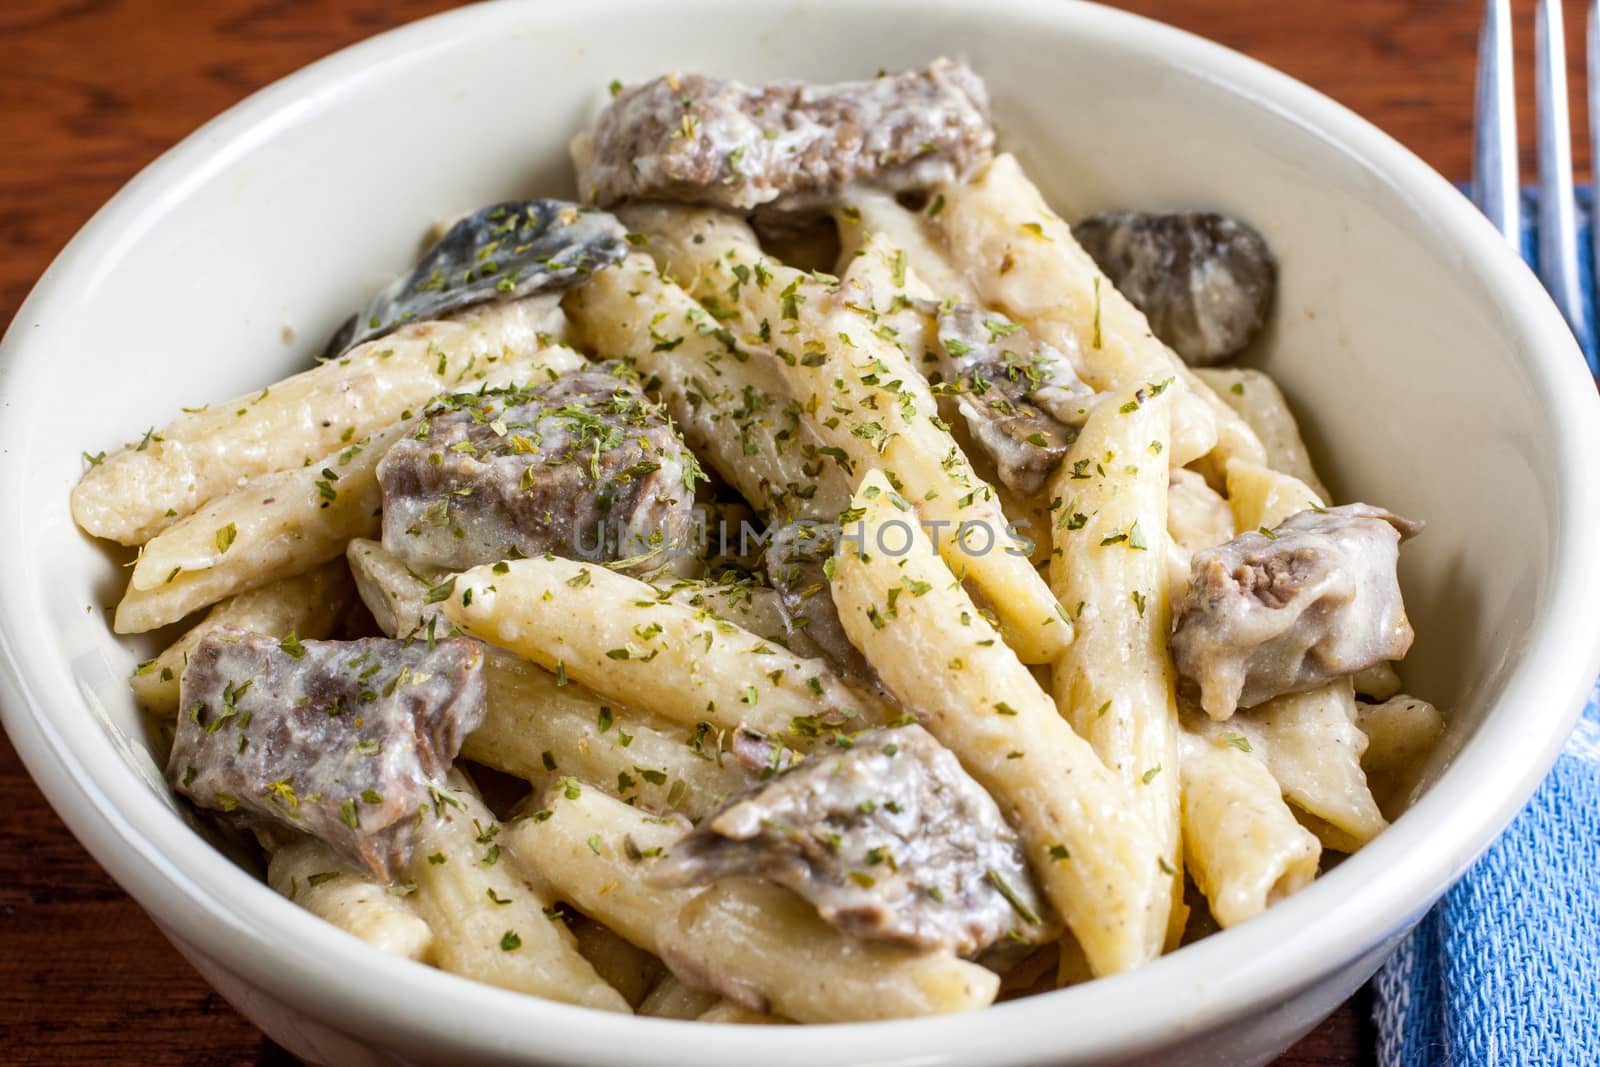 Rustic Beef Stroganoff and Pasta by SouthernLightStudios